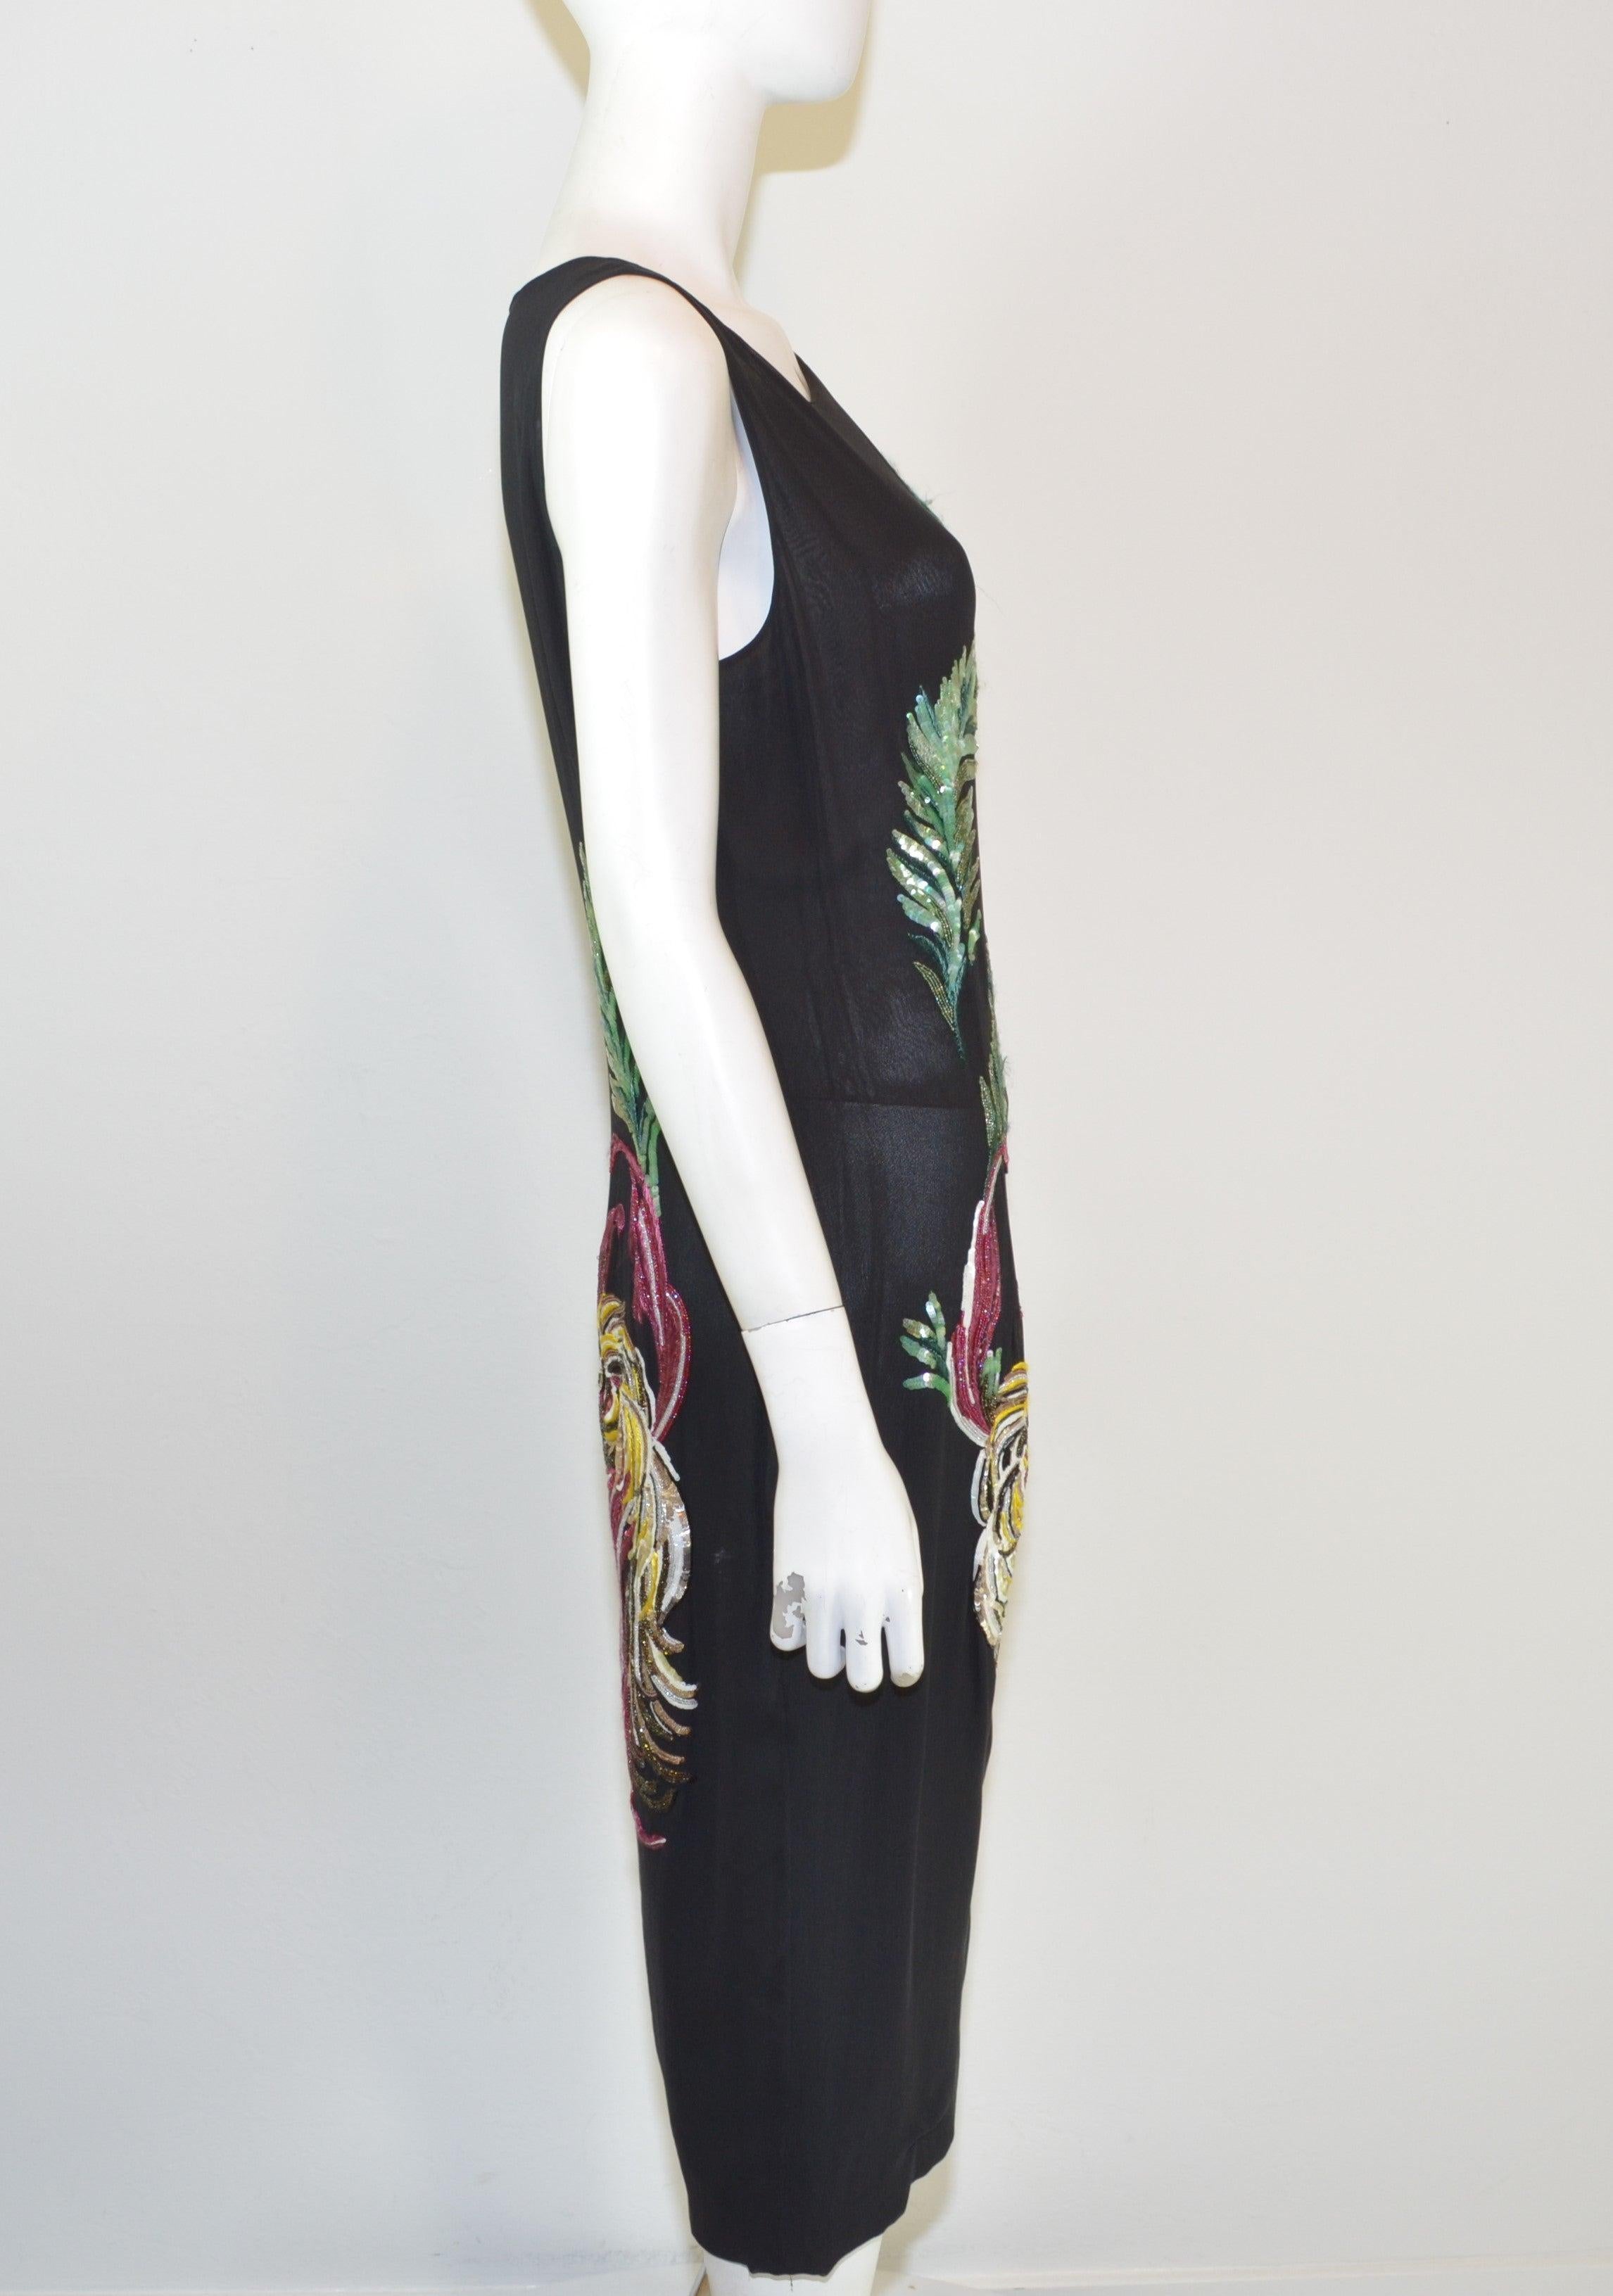 Givenchy Couture dress designed by Alexander McQueen for their 1997 Autumn/Winter Collection. Beautiful black silk dress with multicolored sequins embroidered throughout in a bird and leaves design. Dress is fully lined with a back zippered closure